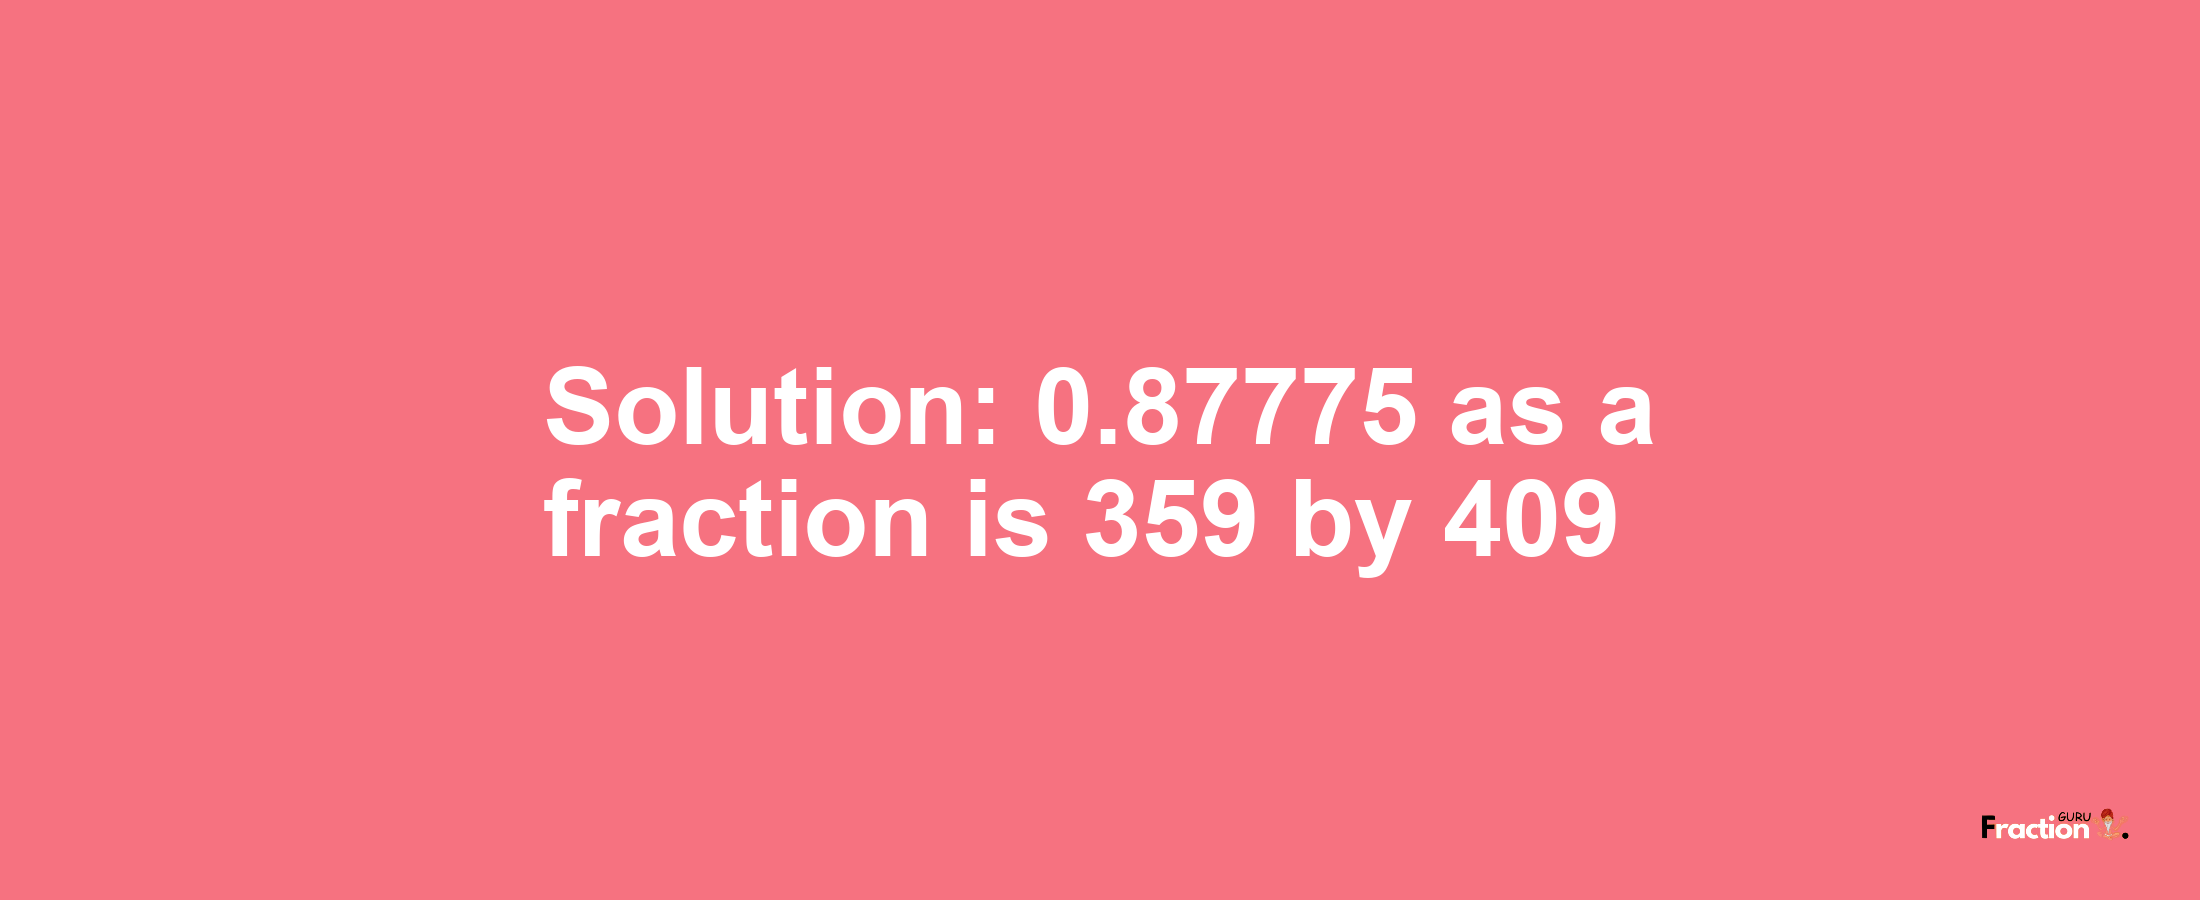 Solution:0.87775 as a fraction is 359/409